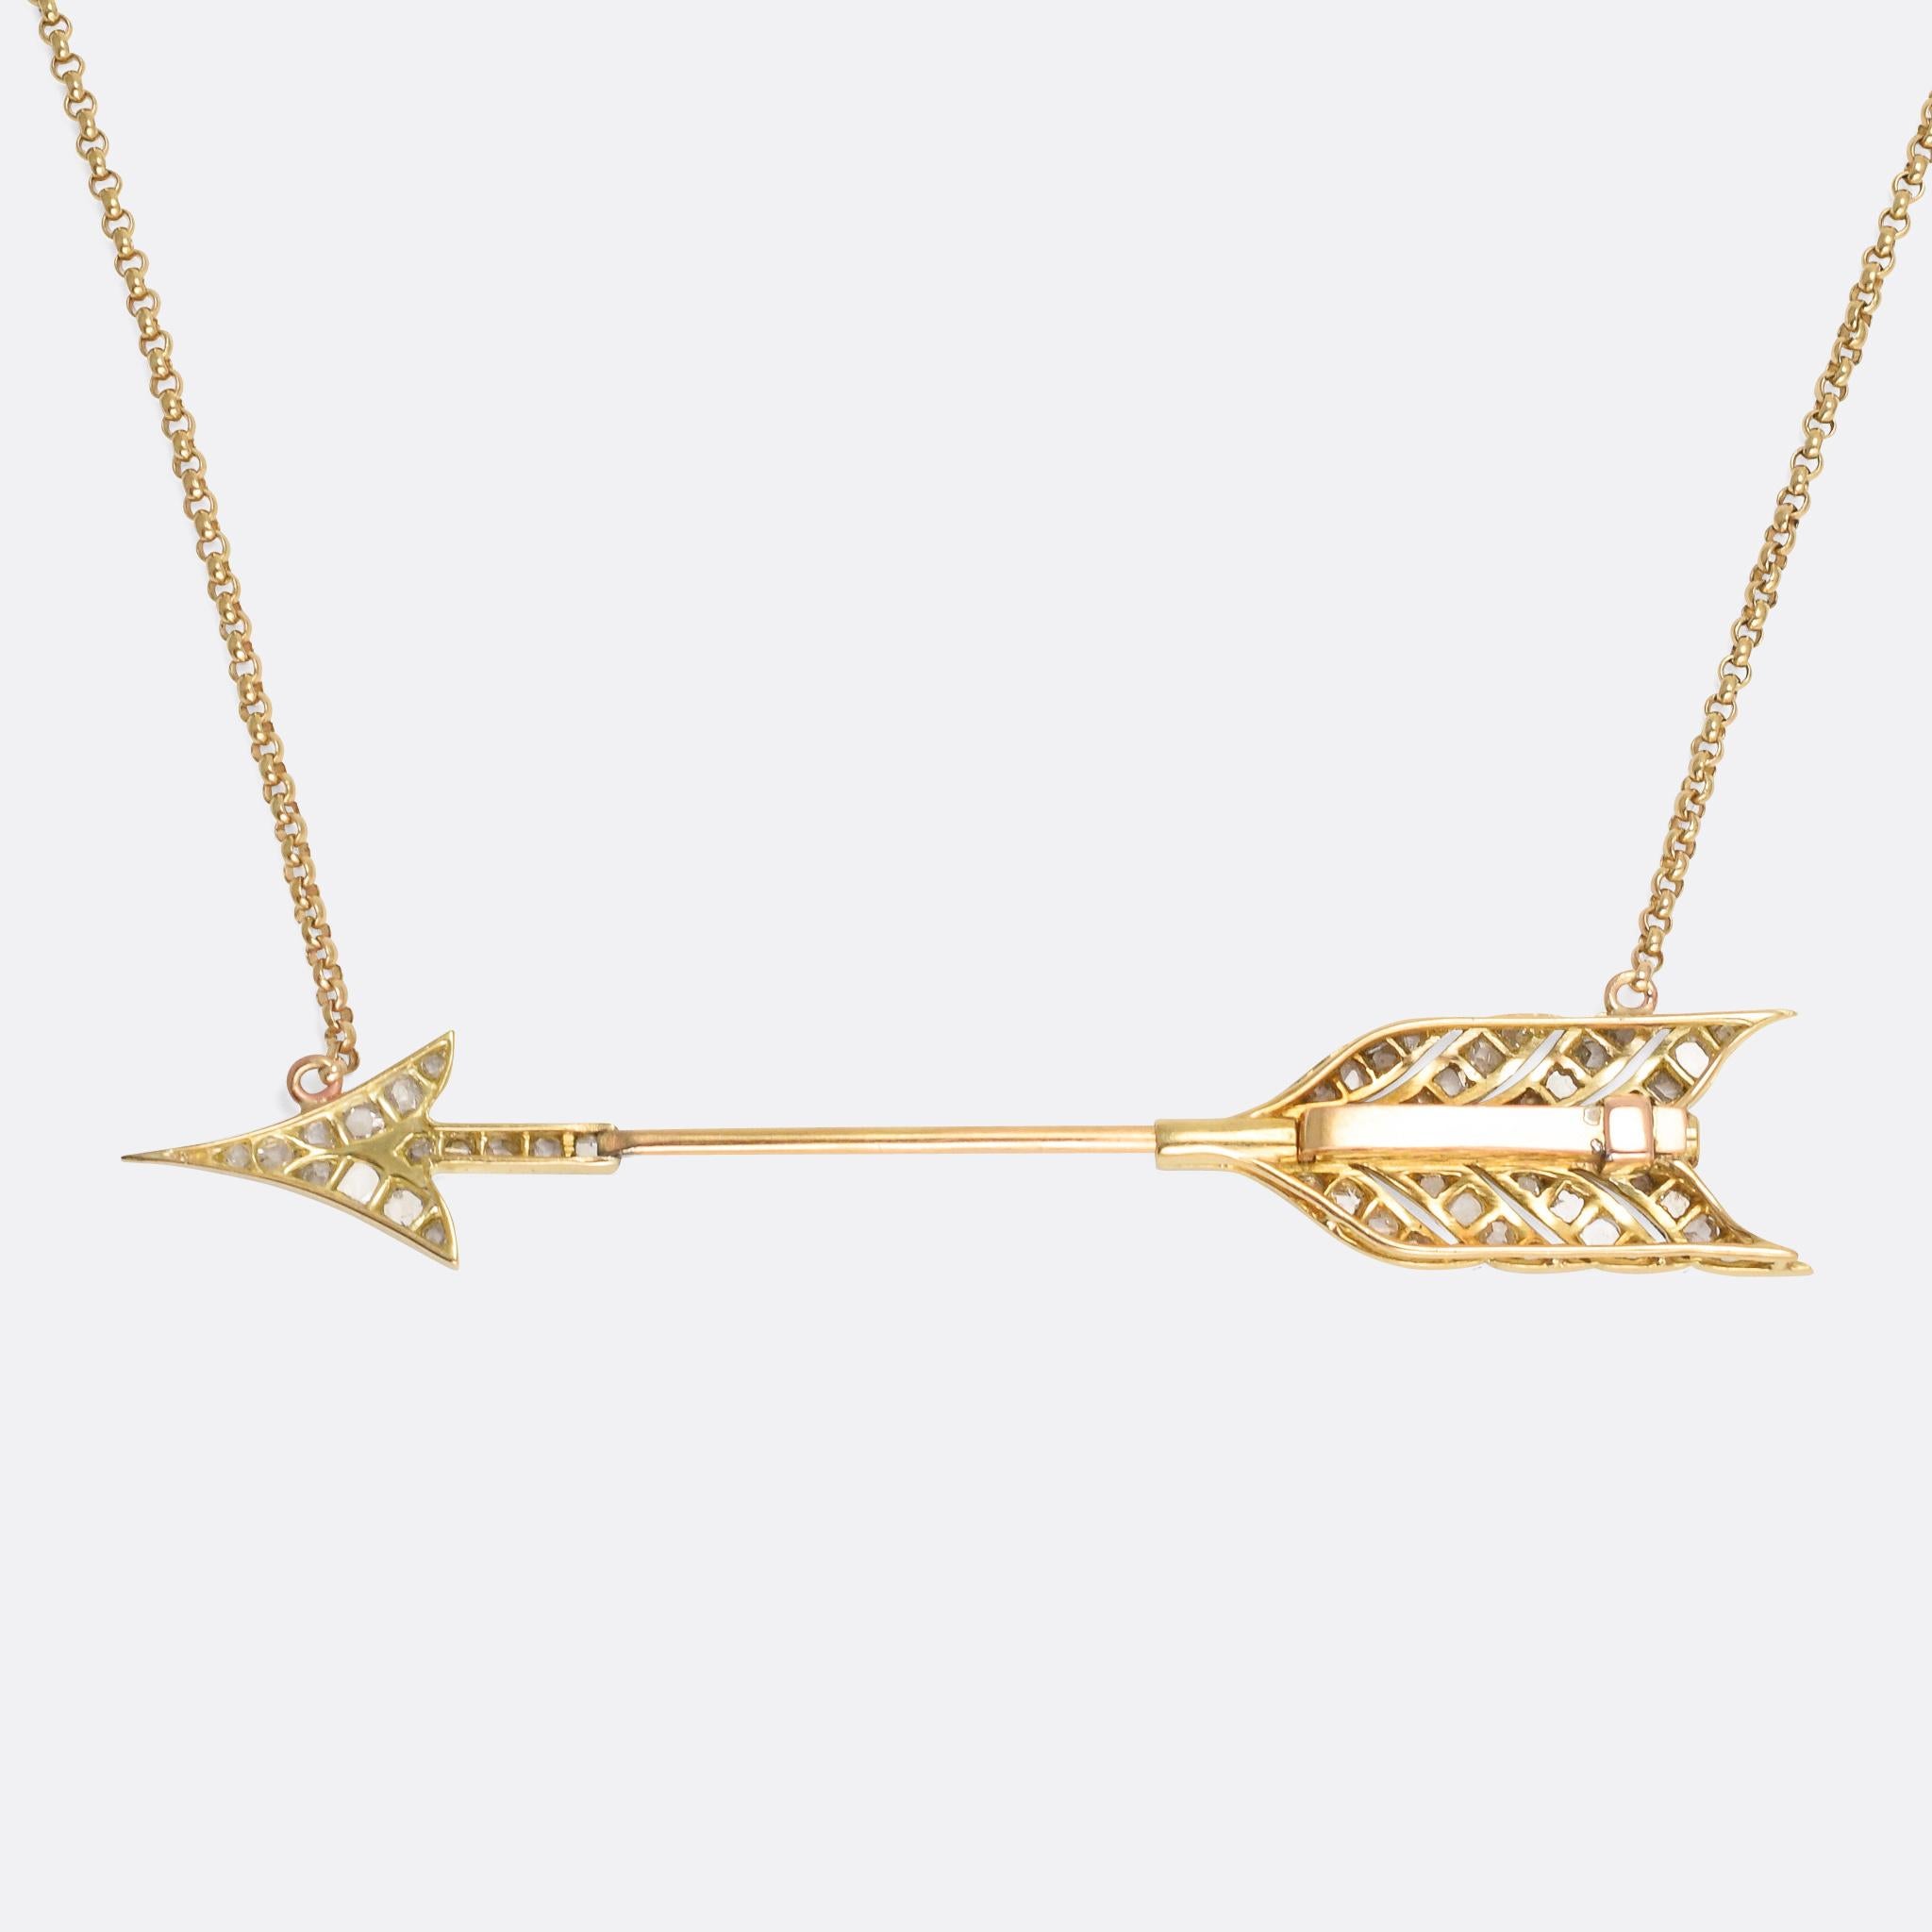 A perfect Edwardian Diamond Arrow Necklace. The head and feathers are platinum, set with rose cut diamonds and finished with the finest millegrain detail, while the shaft and backs are modelled in 18 karat yellow gold. It was made circa 1910, and